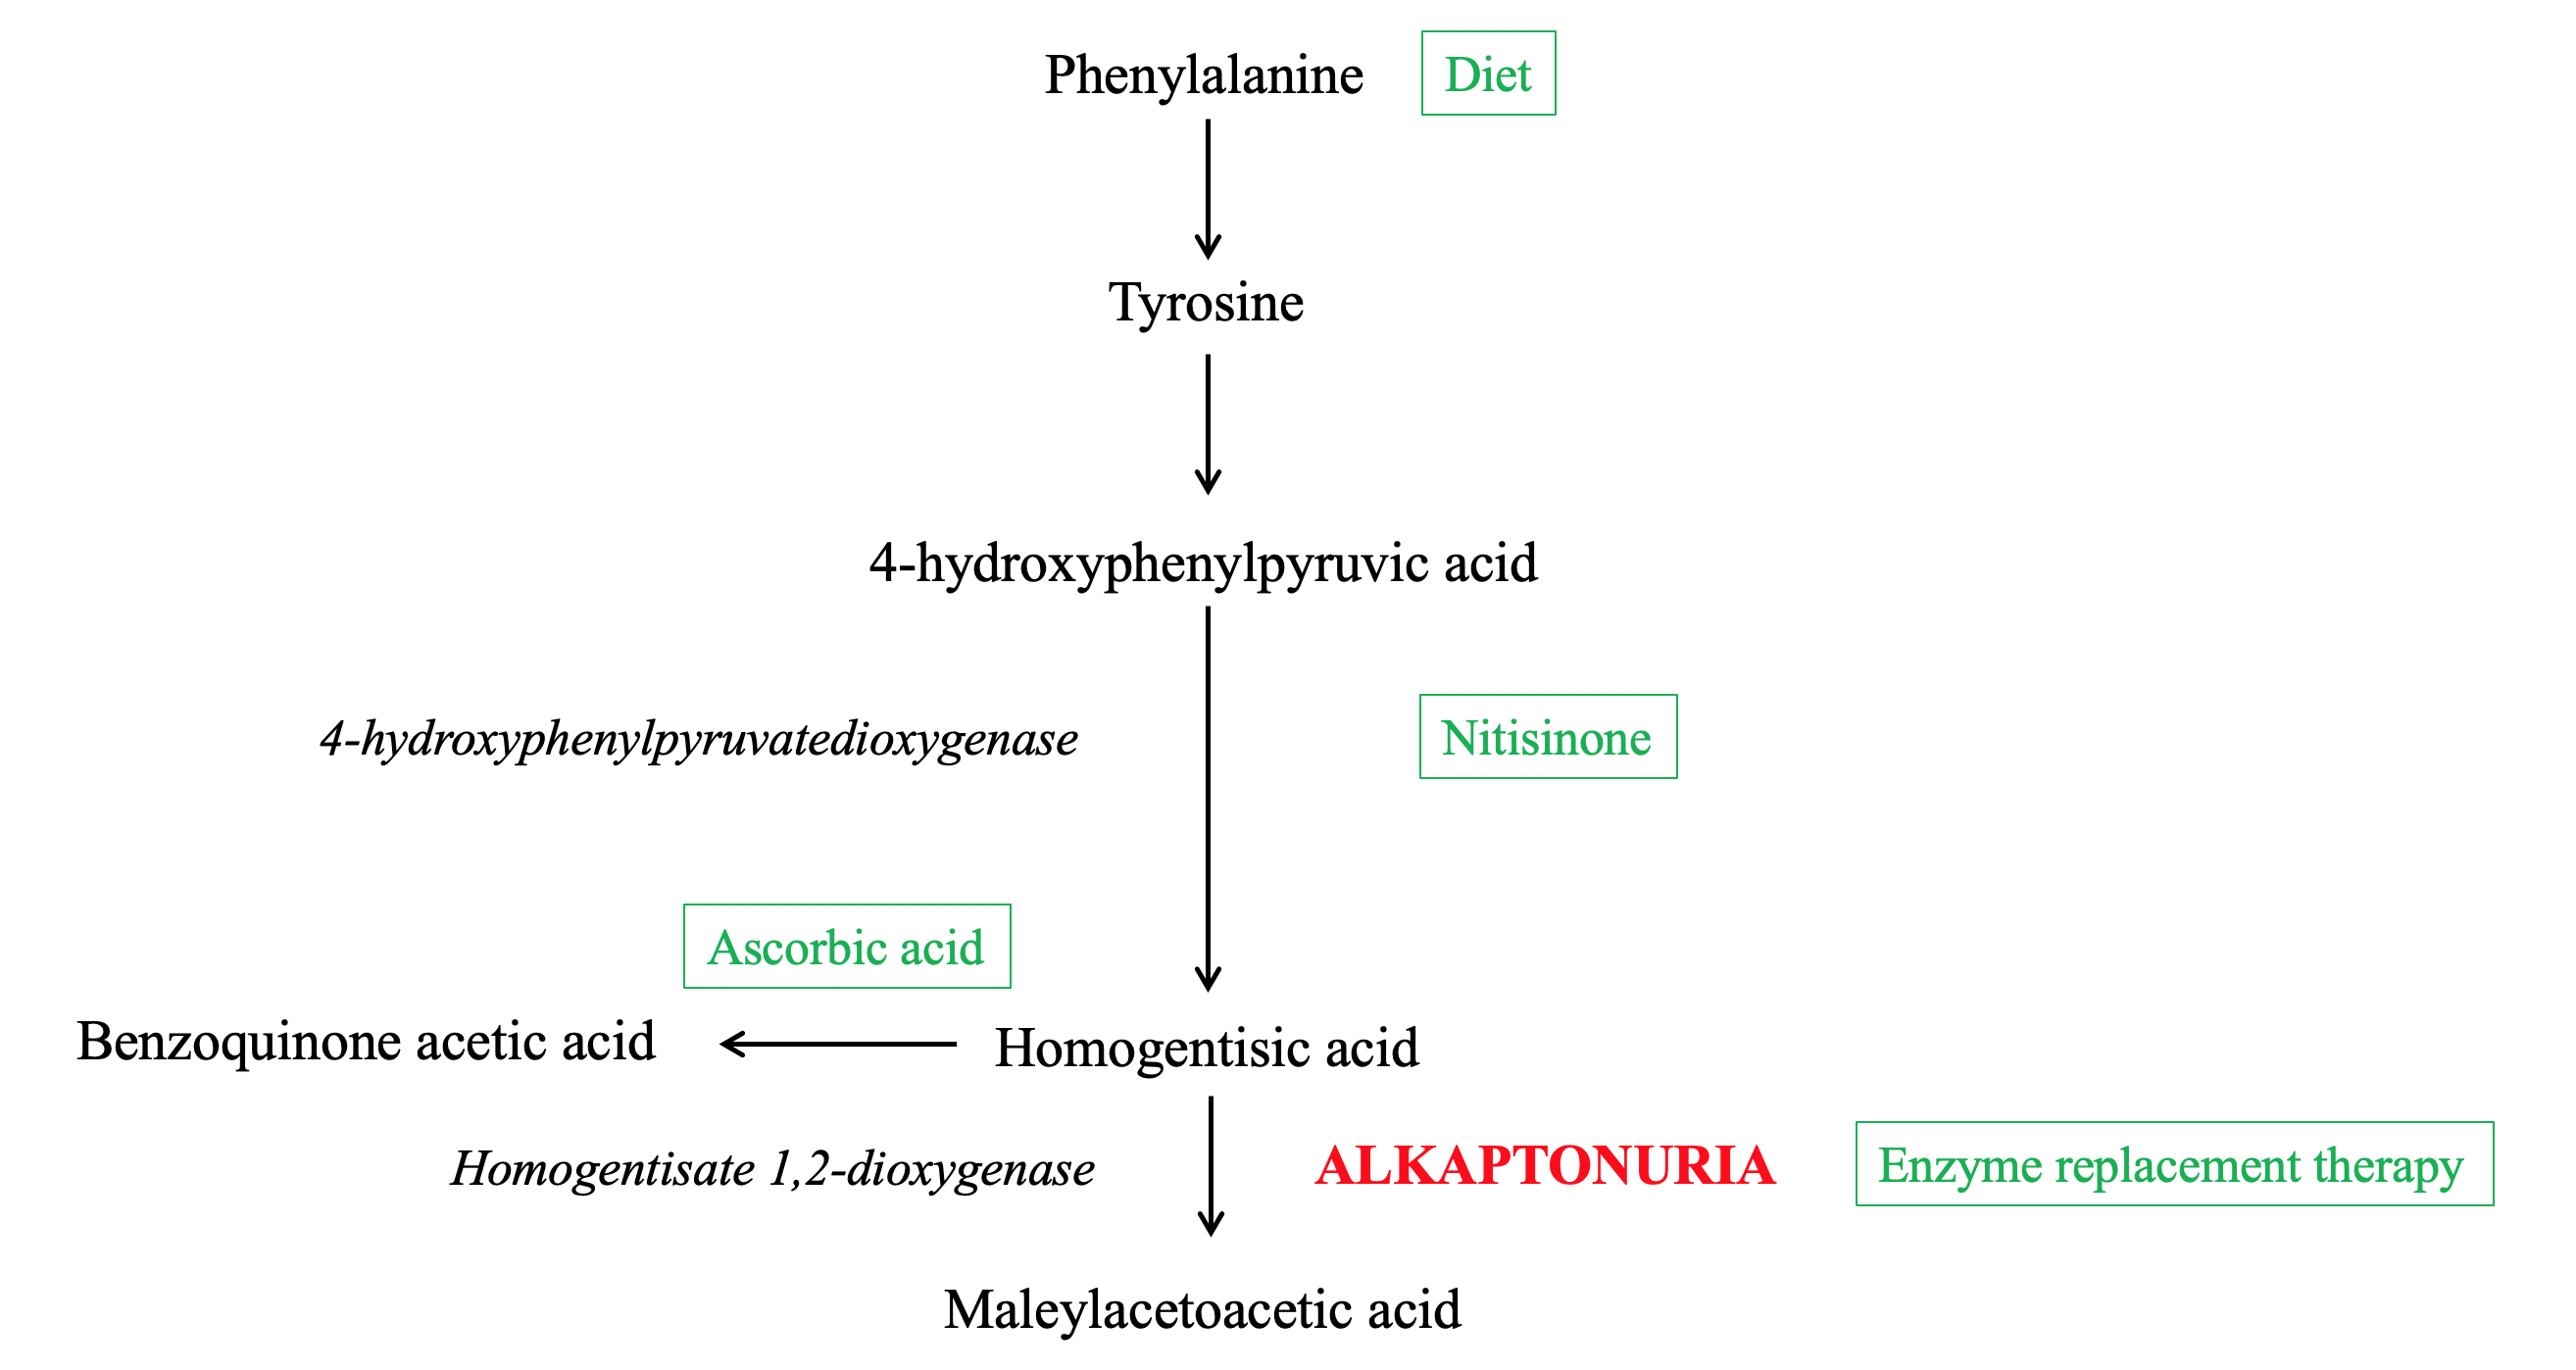 Phenylalanine catabolism pathway and steps of disease and treatment